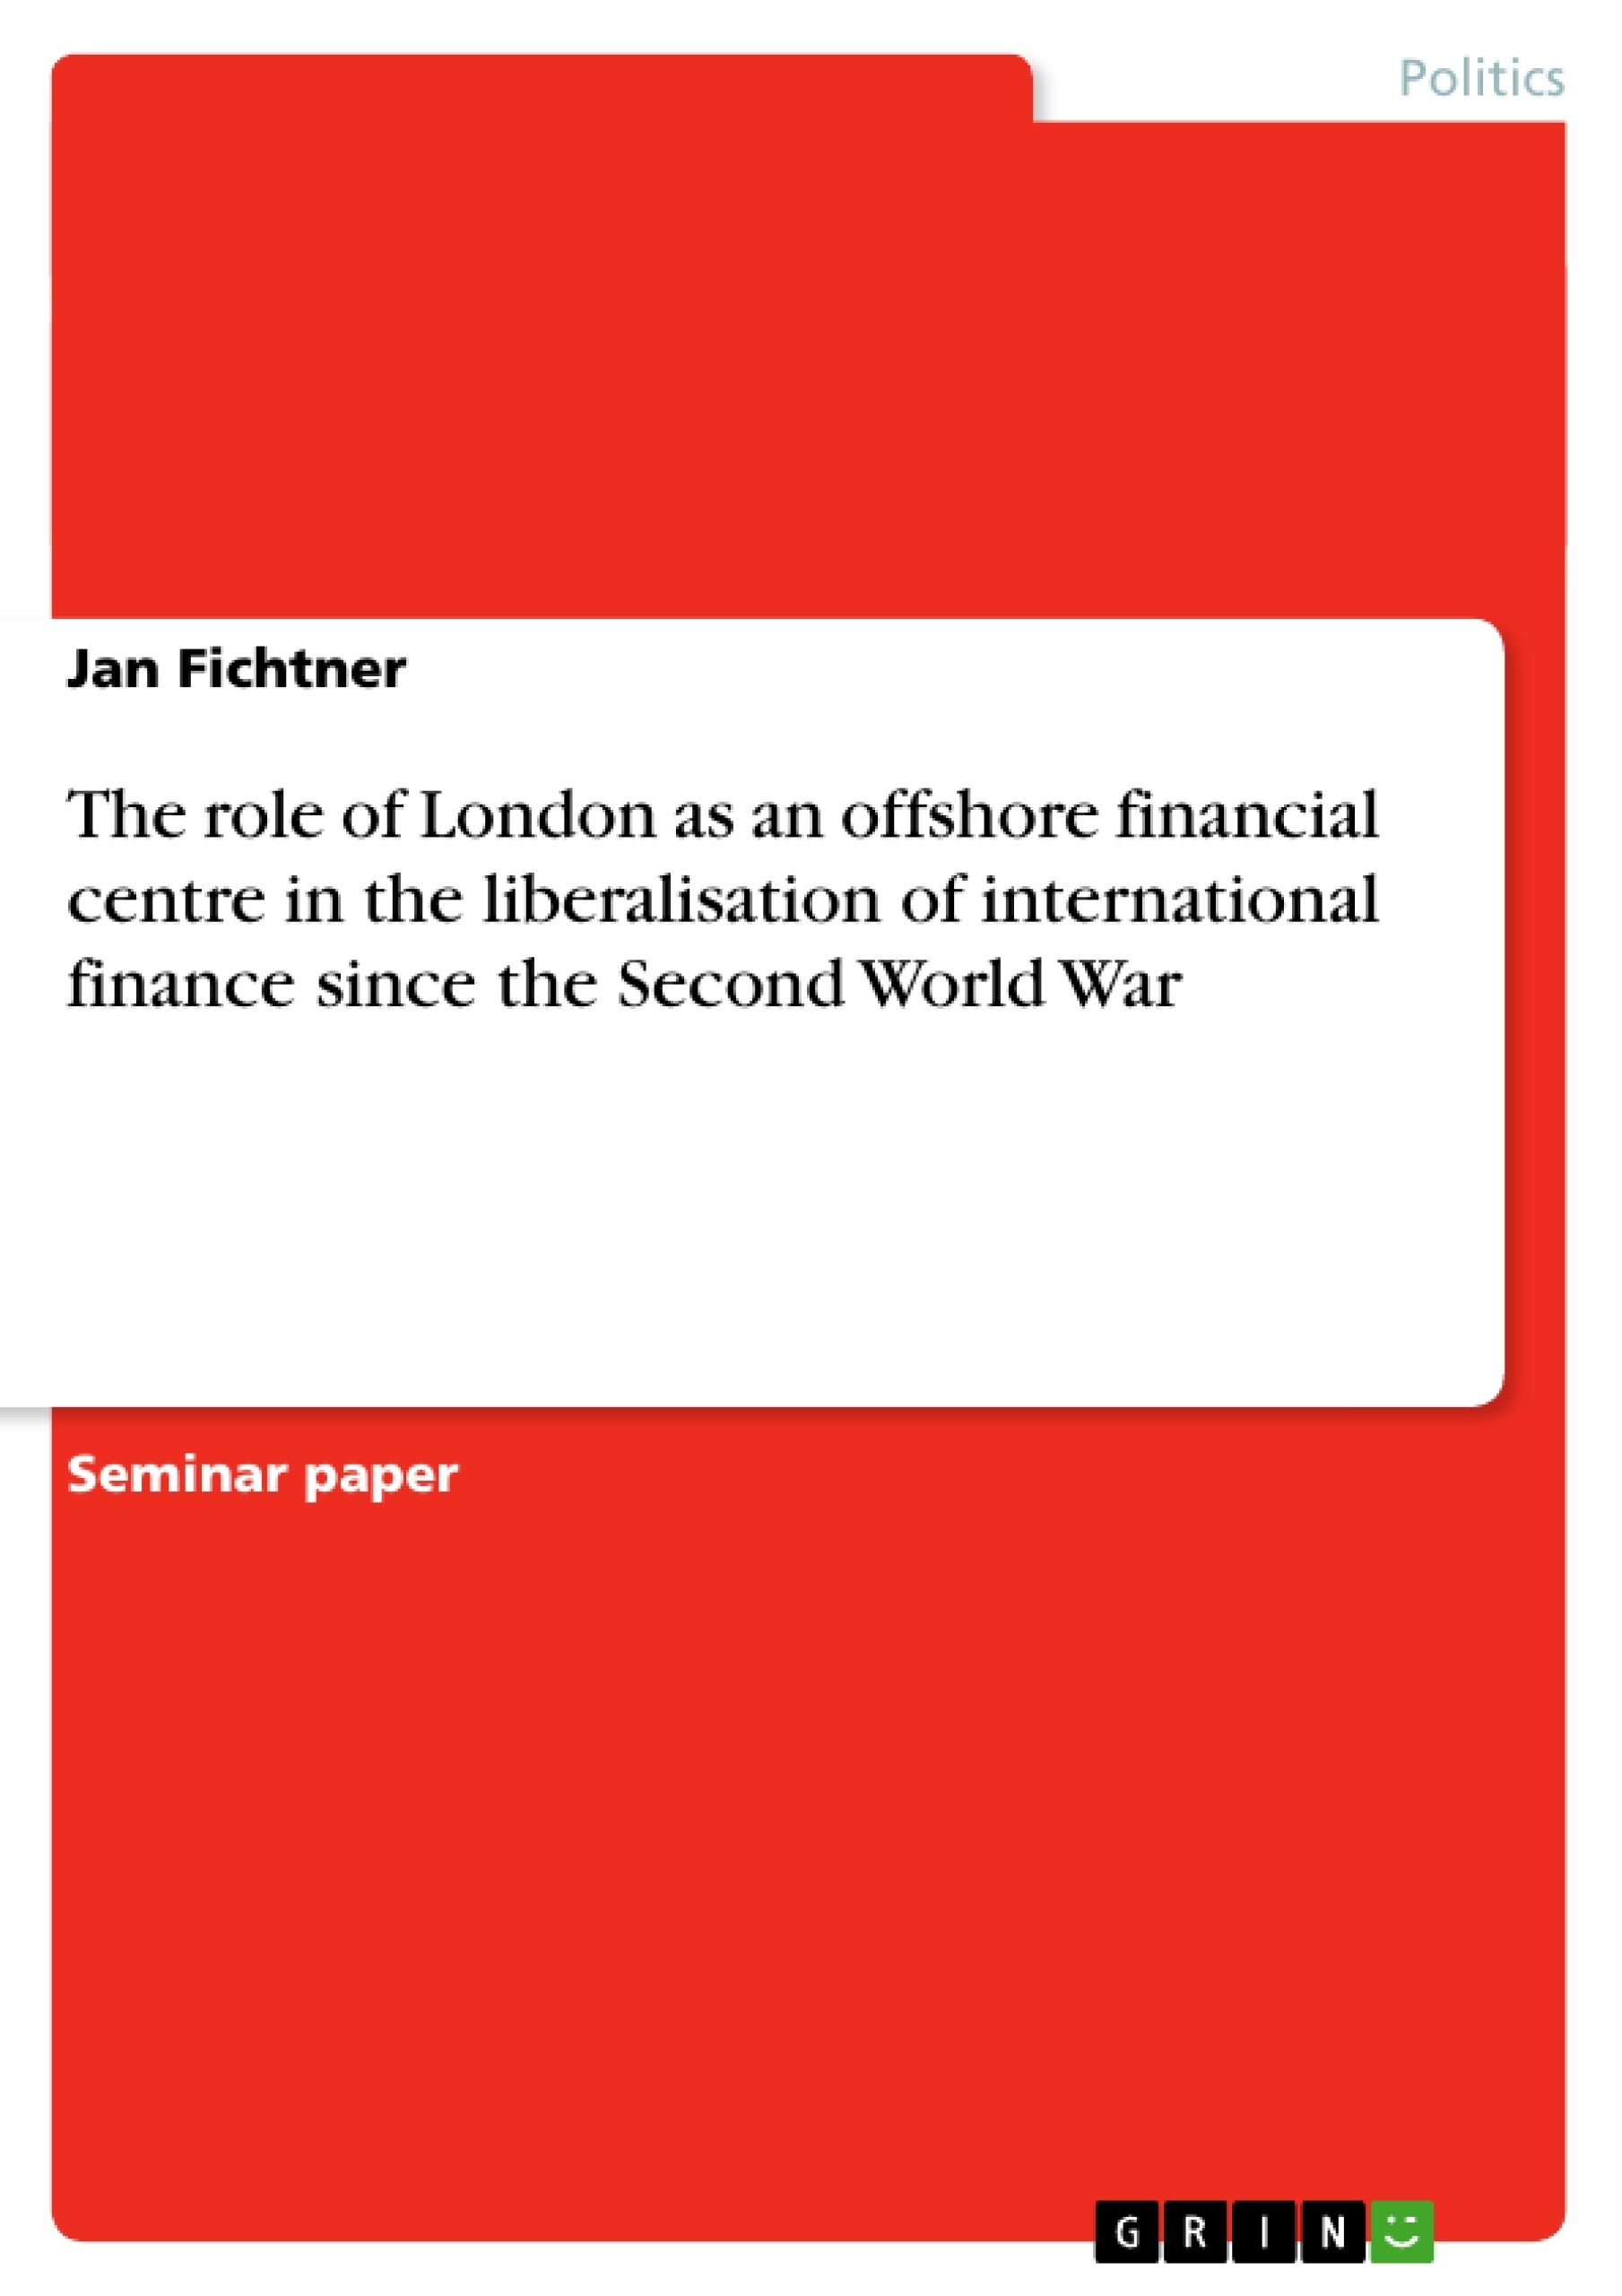 Title: The role of London as an offshore financial centre in the liberalisation of international finance since the Second World War